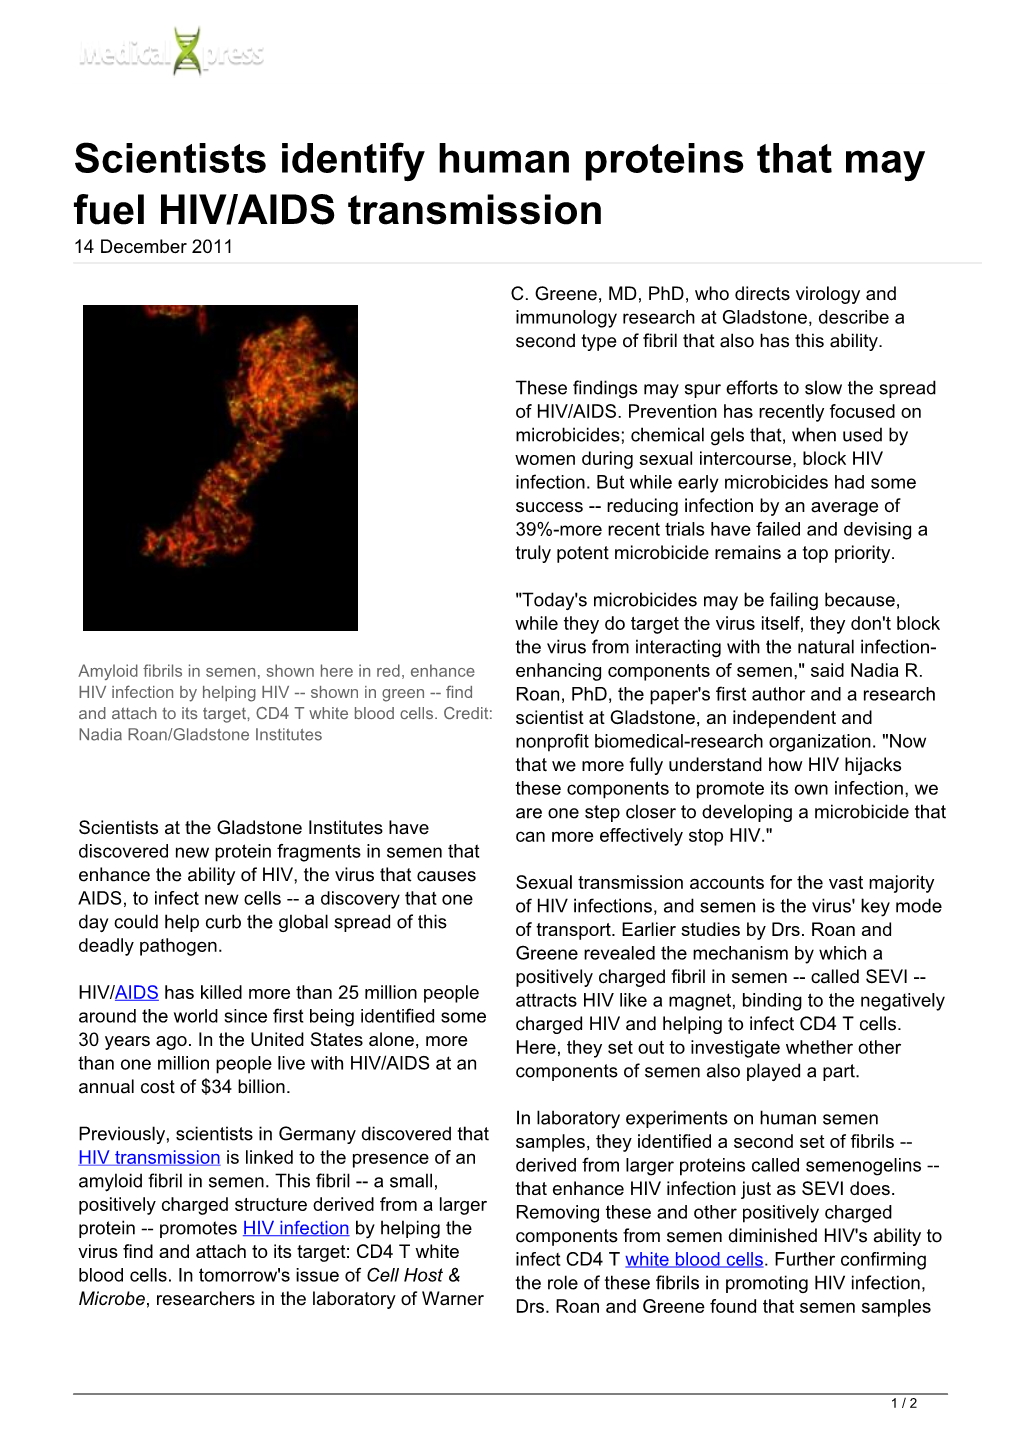 Scientists Identify Human Proteins That May Fuel HIV/AIDS Transmission 14 December 2011